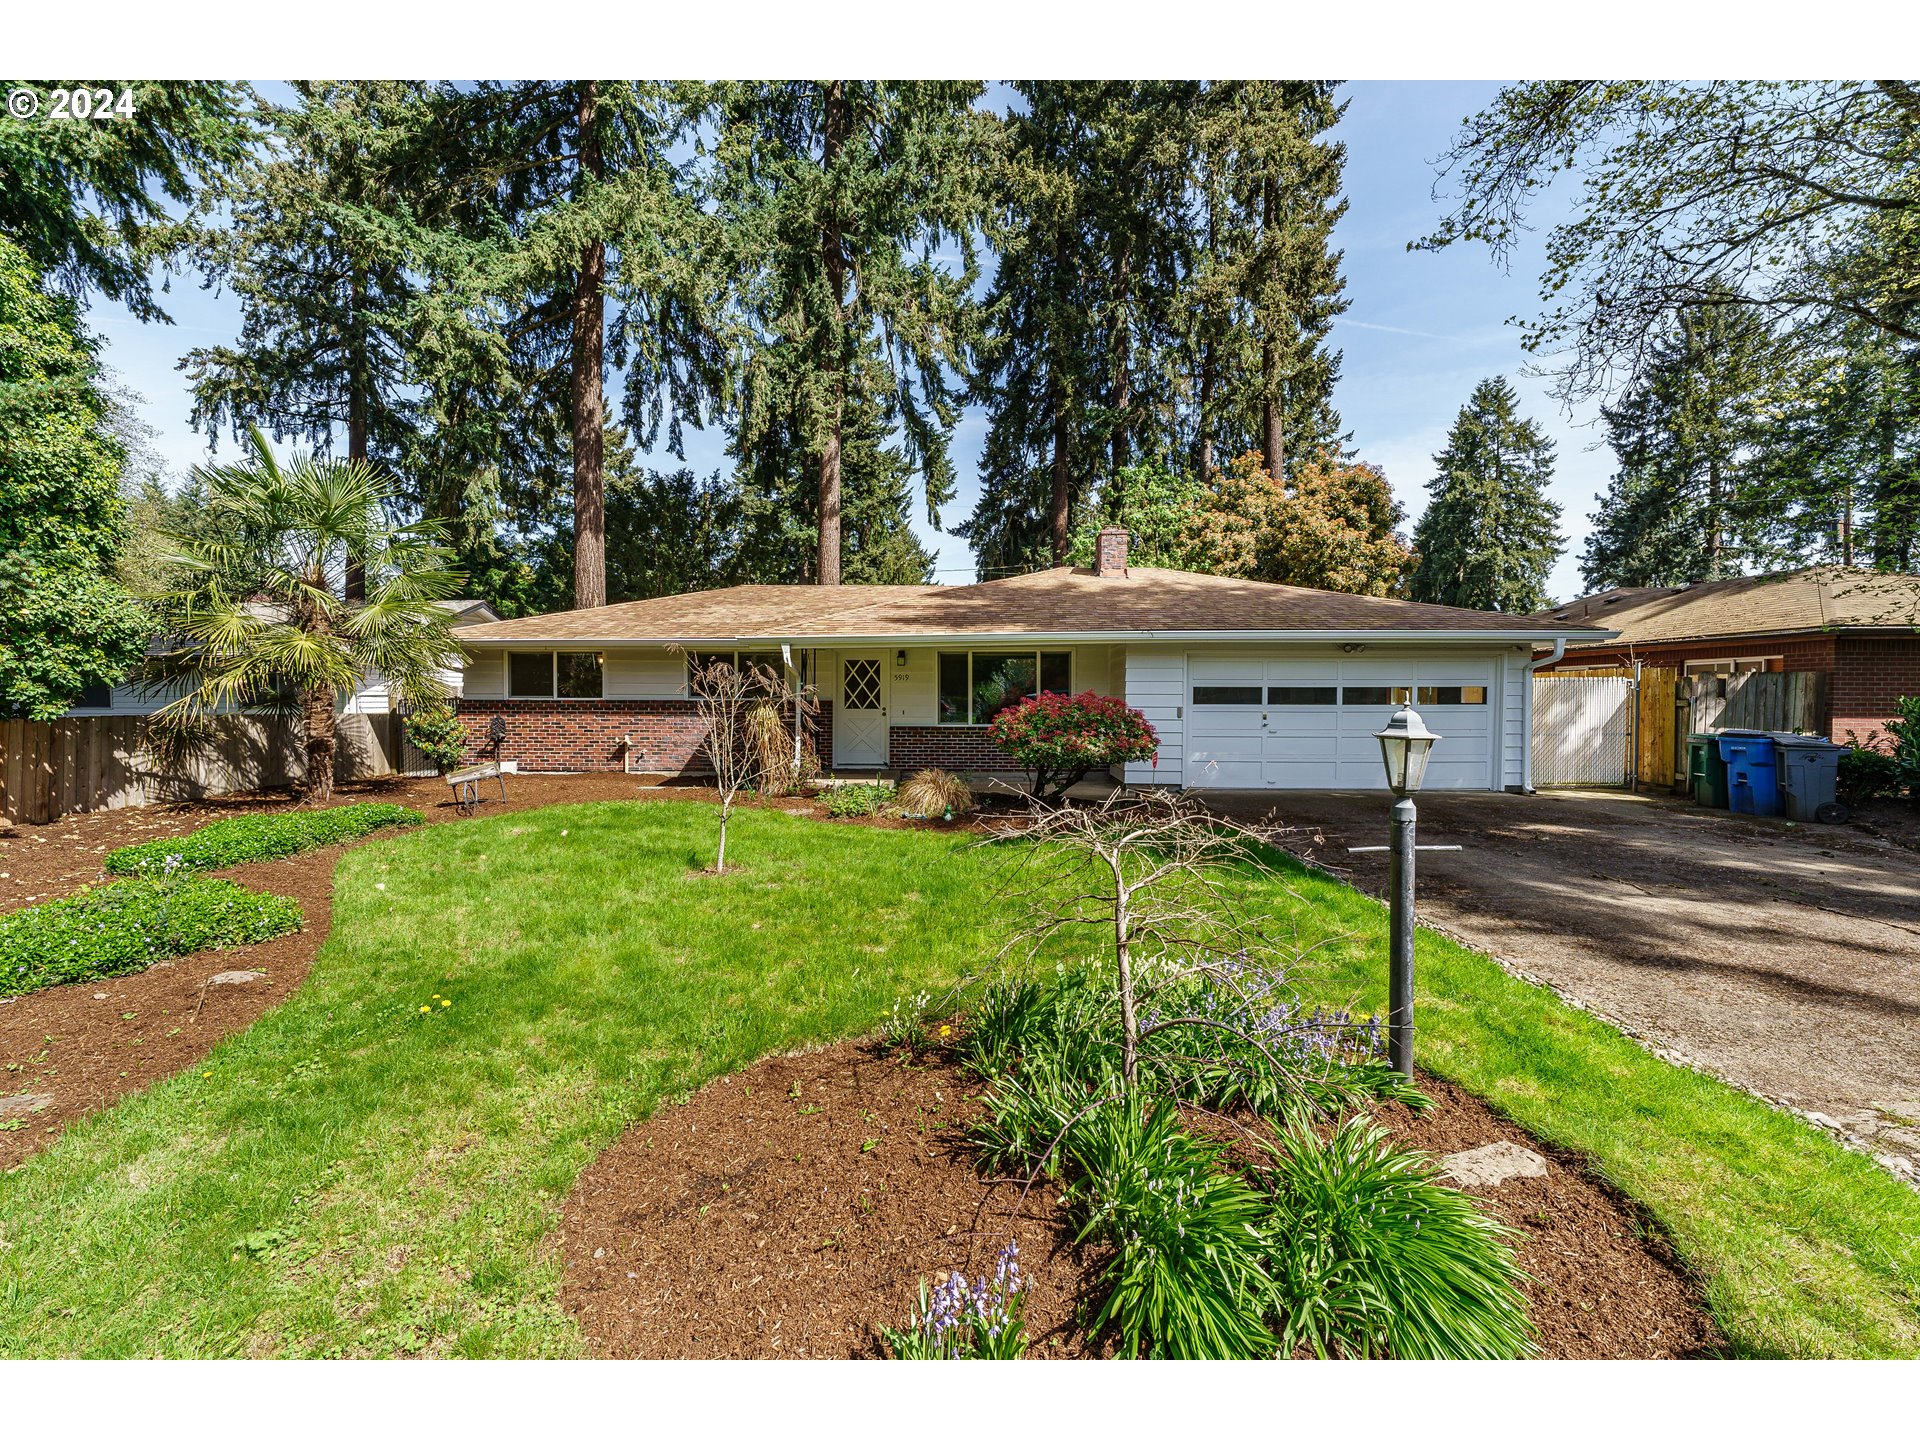 5919 NW LINCOLN AVE, Vancouver, WA 98660